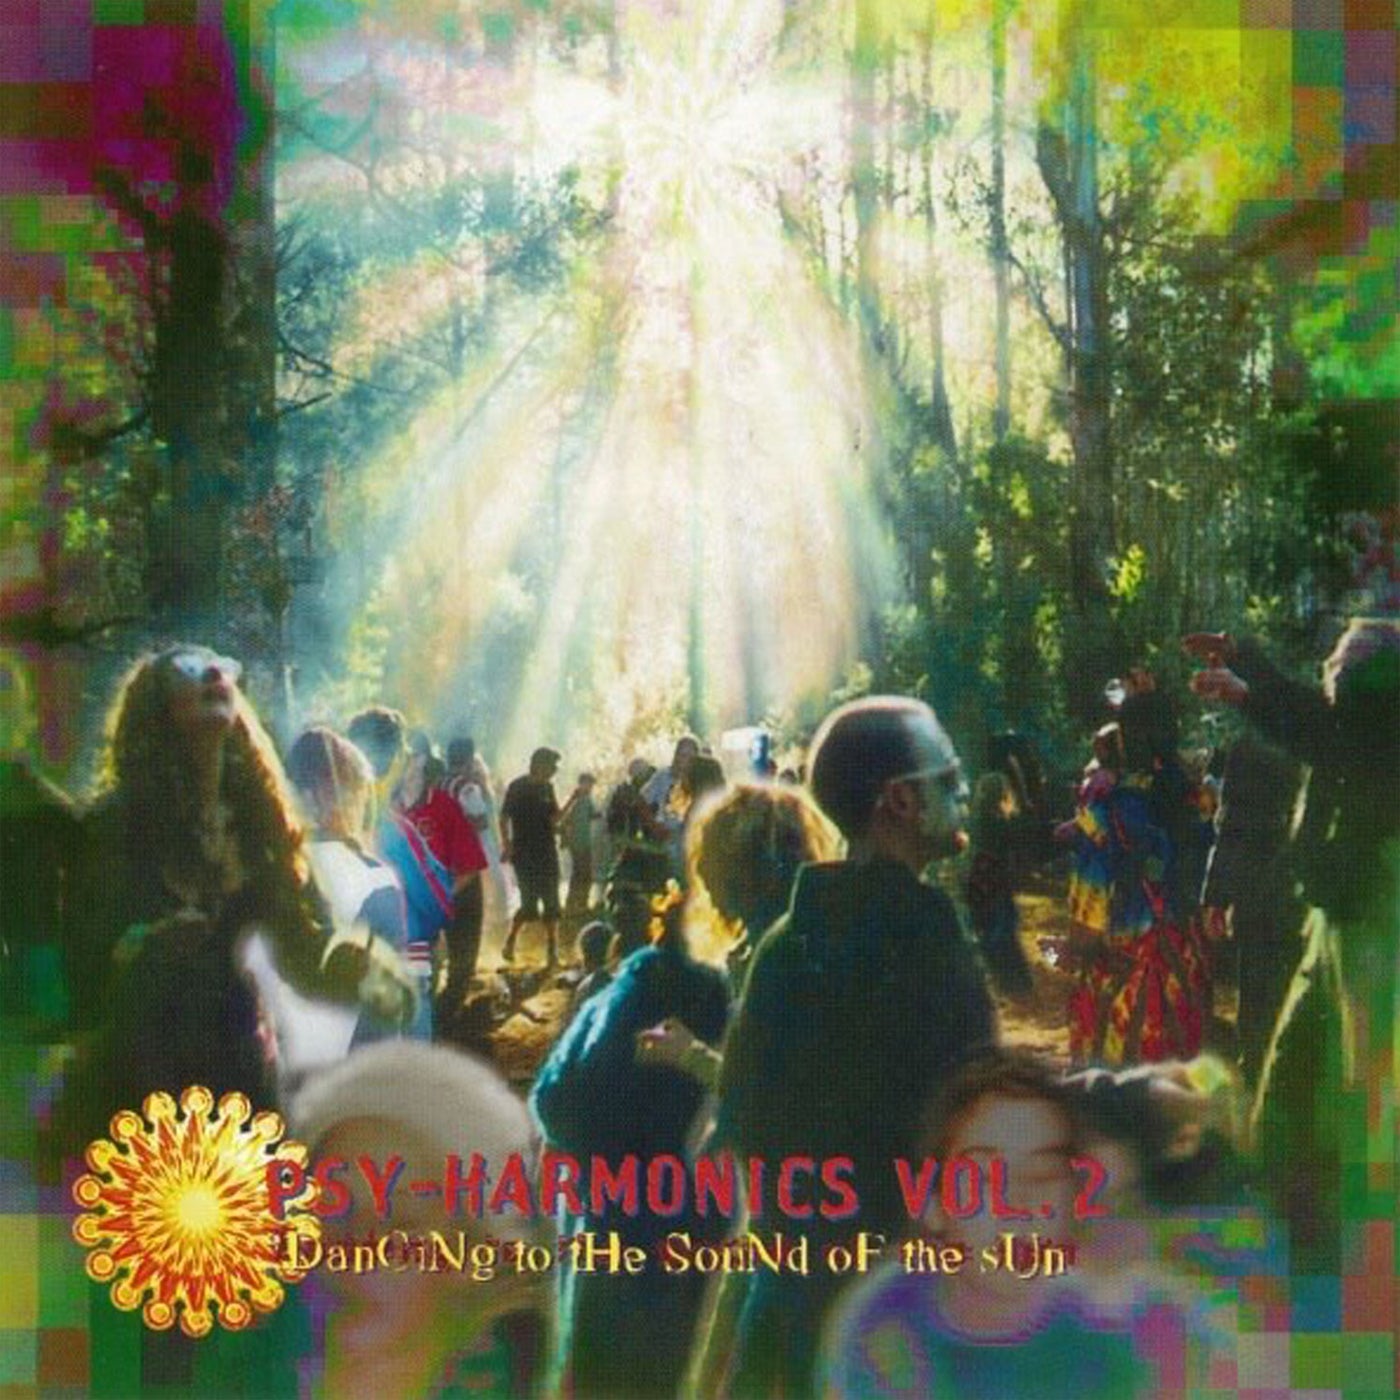 Psy-Harmonics, Vol. 2 - Dancing To The Sound Of The Sun